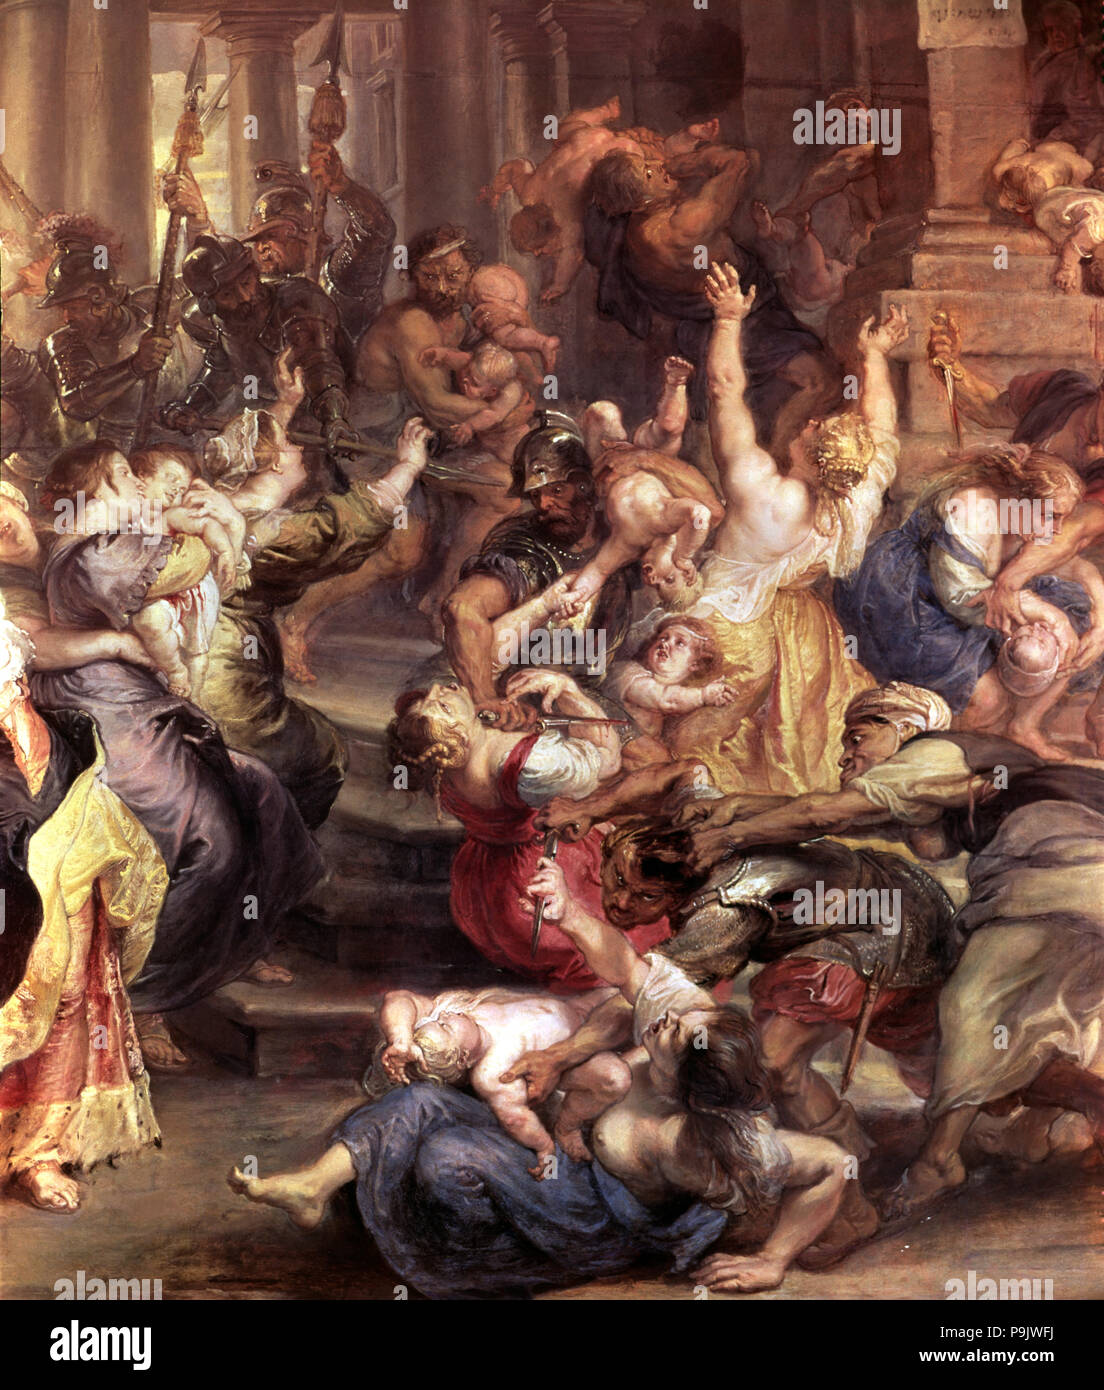 'Massacre of the Innocents', detail of an oil painting by Peter Paul Rubens. Stock Photo